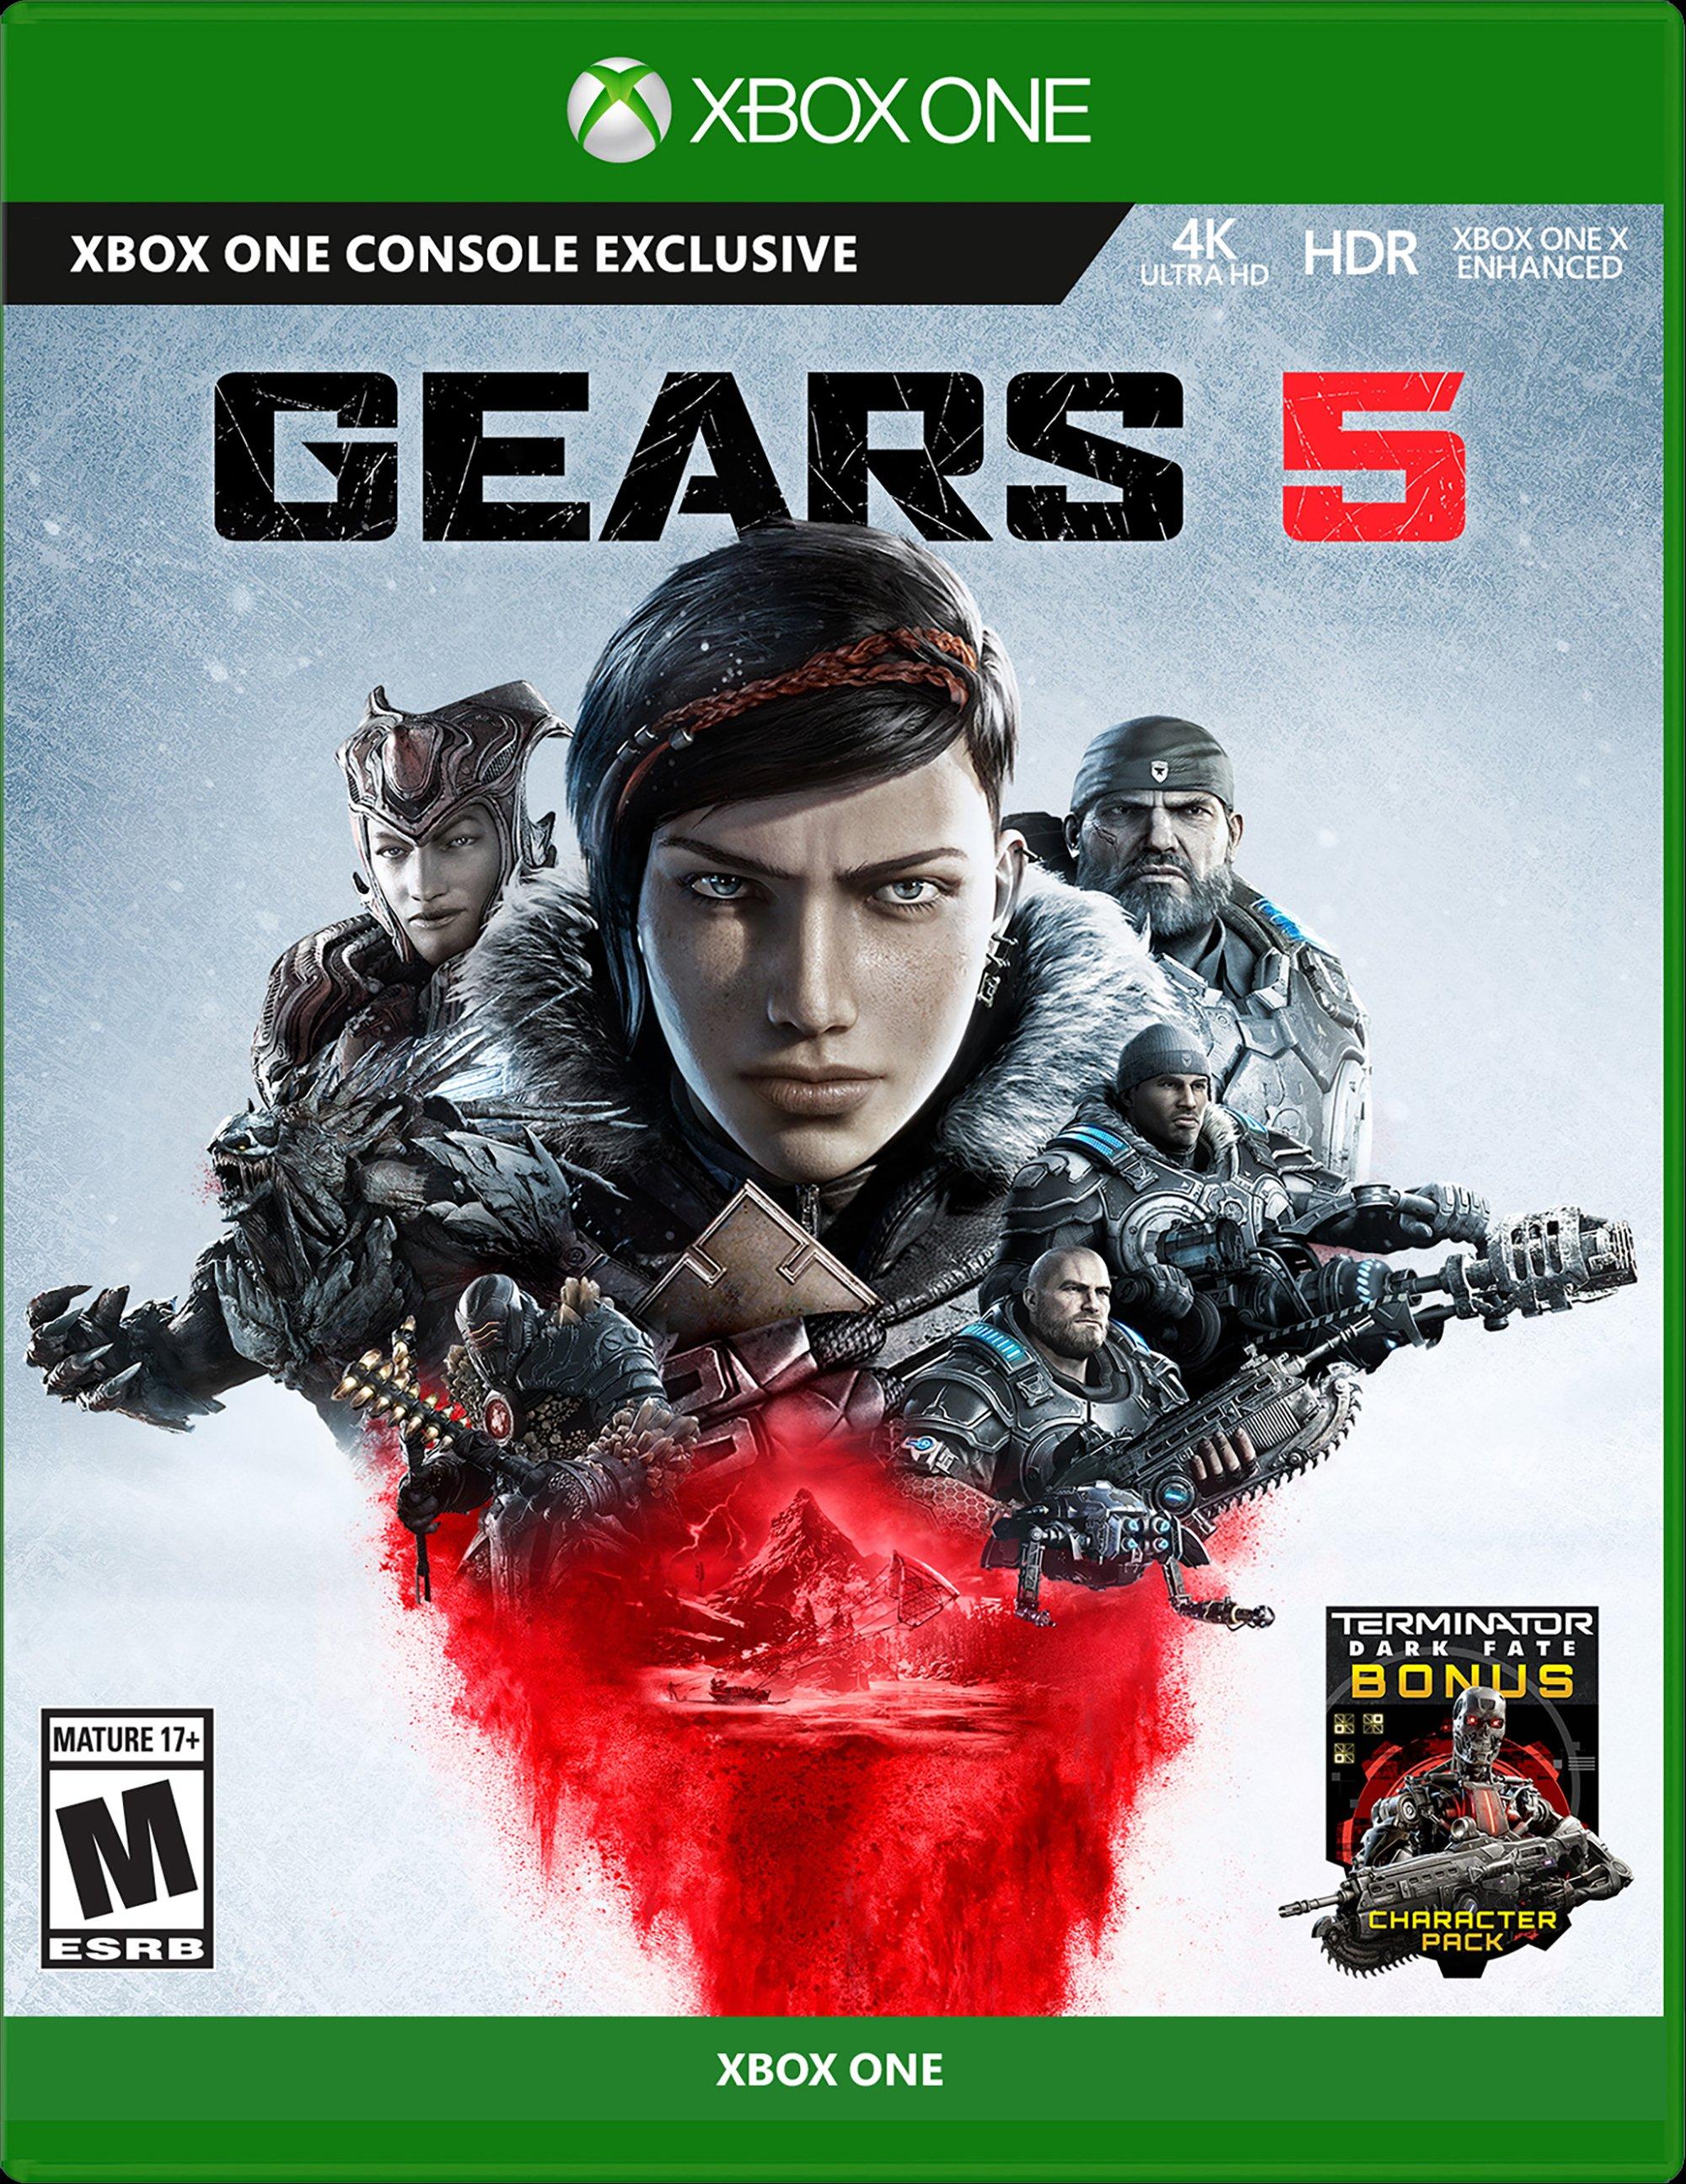 xbox store gears 5